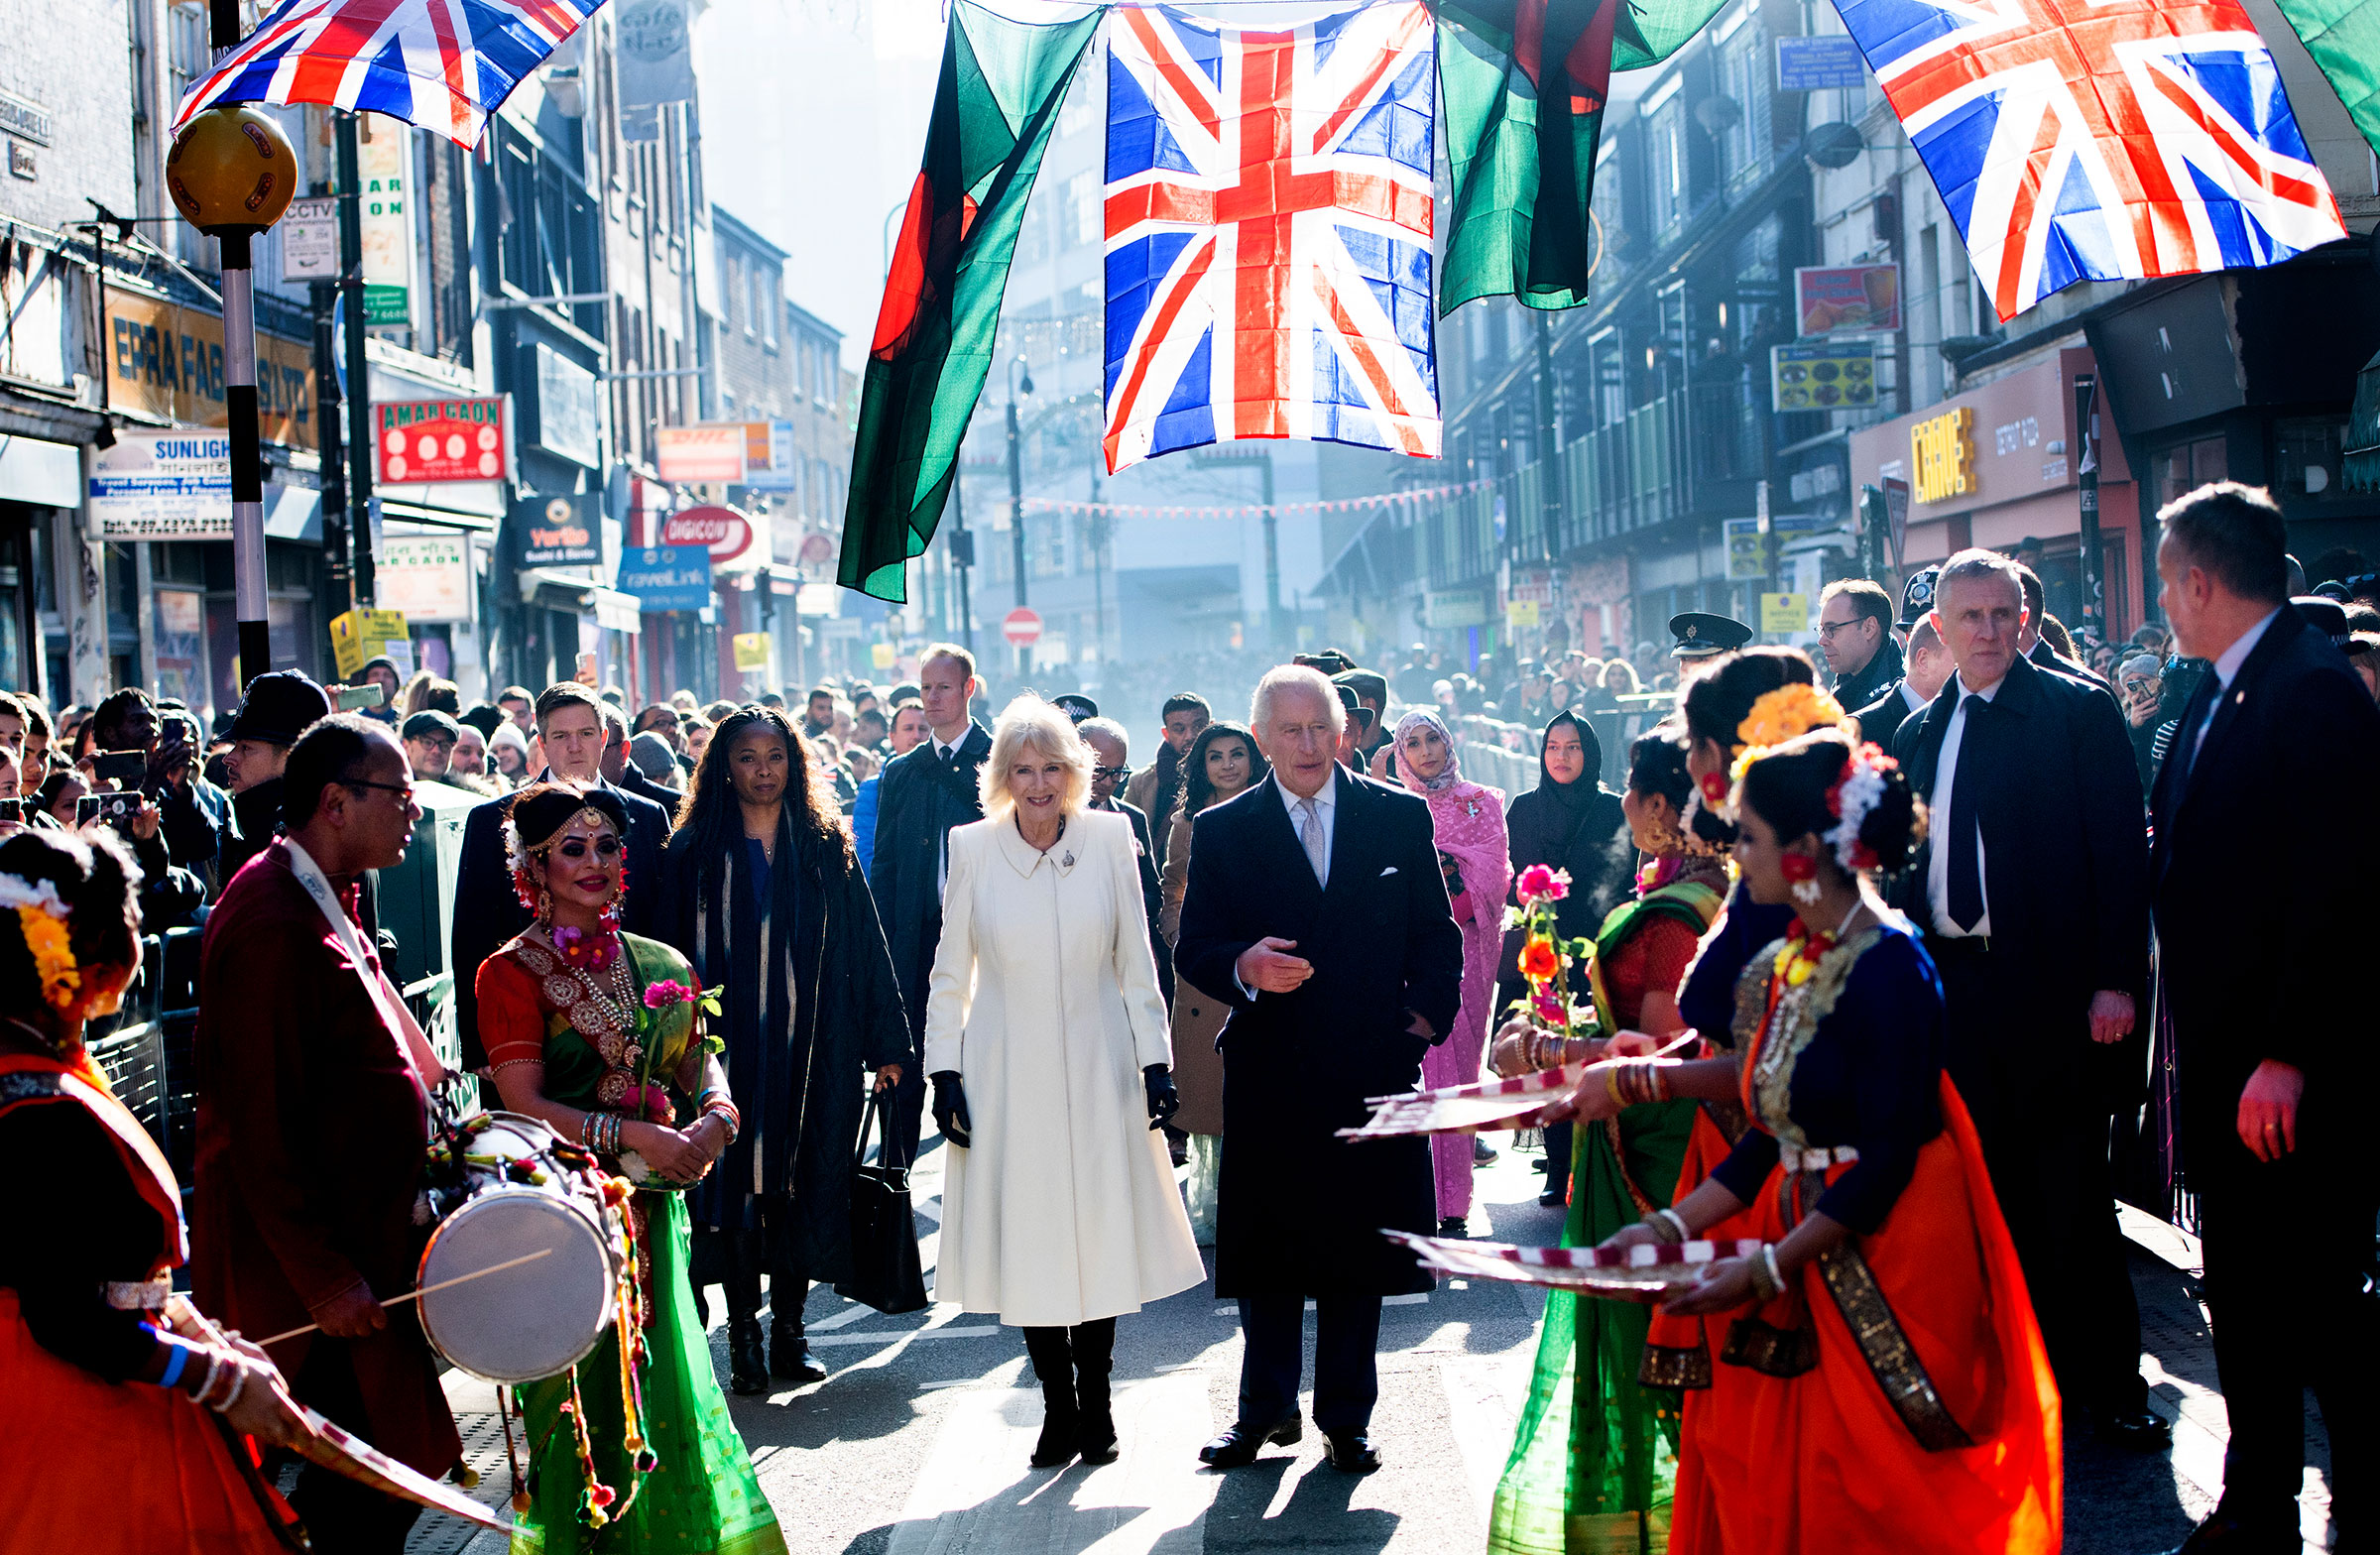 King Charles III and Camilla, Queen Consort meet members of the public during a visit to the Bangladeshi community of Brick Lane on February 8, 2023 in London, England. (Eddie Mulholland—WPA Pool/Getty Images)